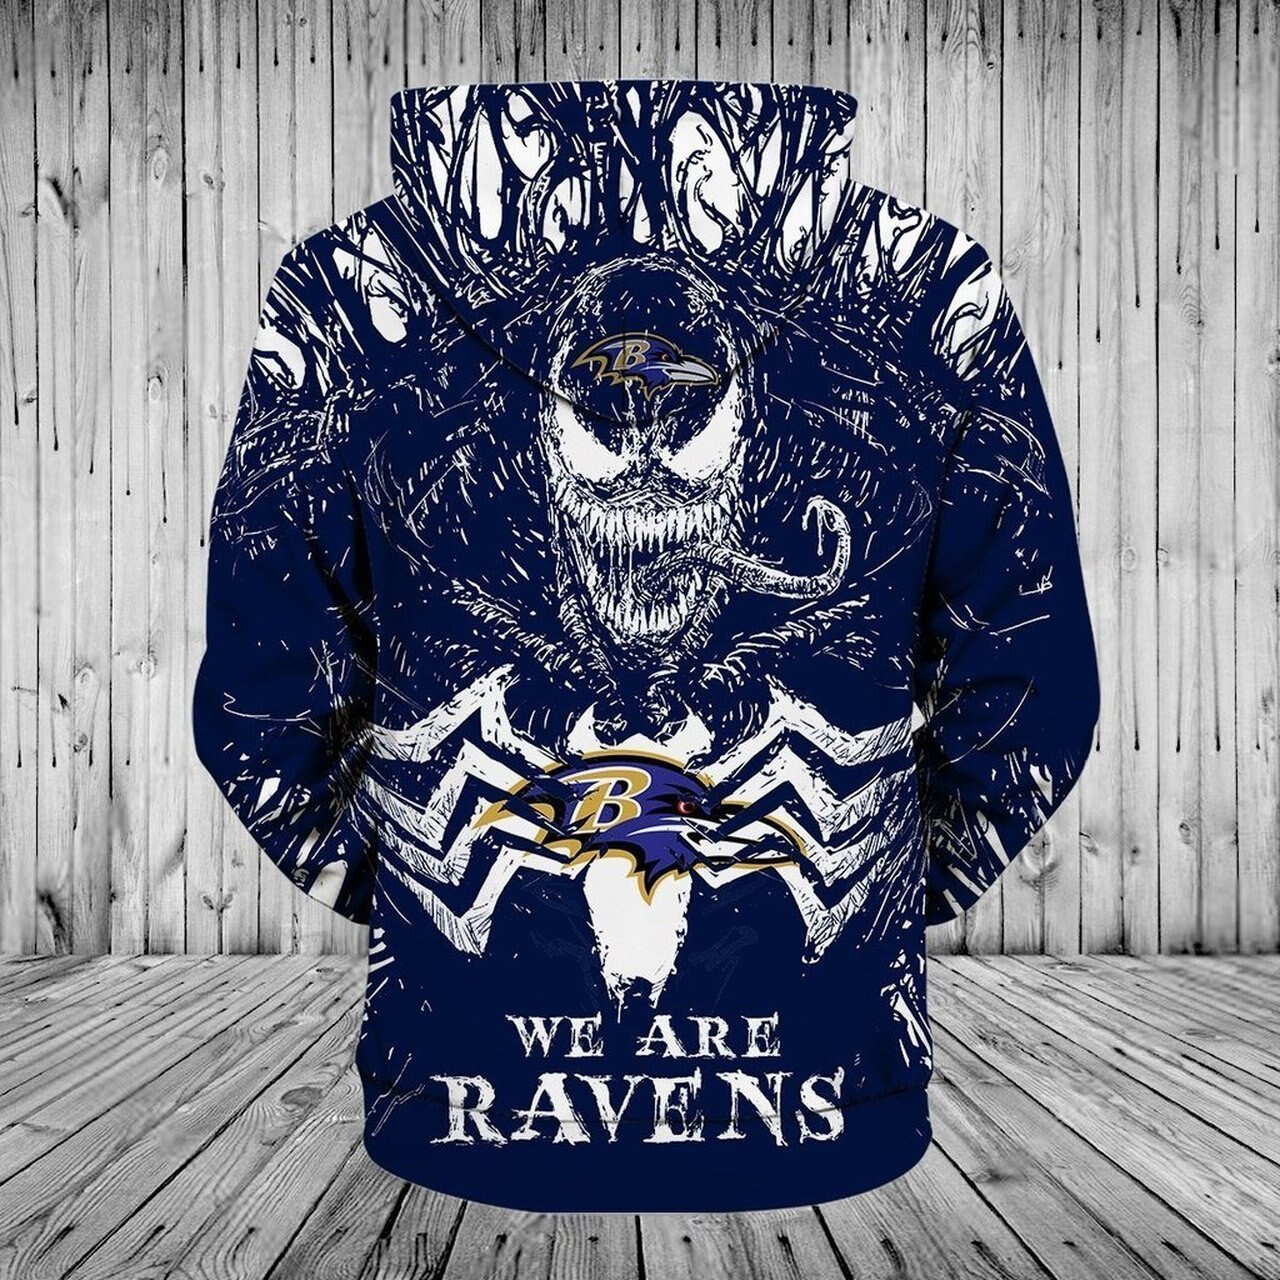  **(OFFICIAL-N.F.L.BALTIMORE-RAVENS-PULLOVER-TEAM-HOODIES/WE-ARE-RAVENS & NEON-PURPLE-VENOM-SKULL/OFFICIAL-RAVENS-TEAM-LOGOS & OFFICIAL-RAVENS-CLASSIC-TEAM-COLORS/CUSTOM-3D-GRAPHIC-PRINTED-DOUBLE-SIDED/WARM-PREMIUM-RAVENS-TEAM-PULLOVER-HOODIES)** 